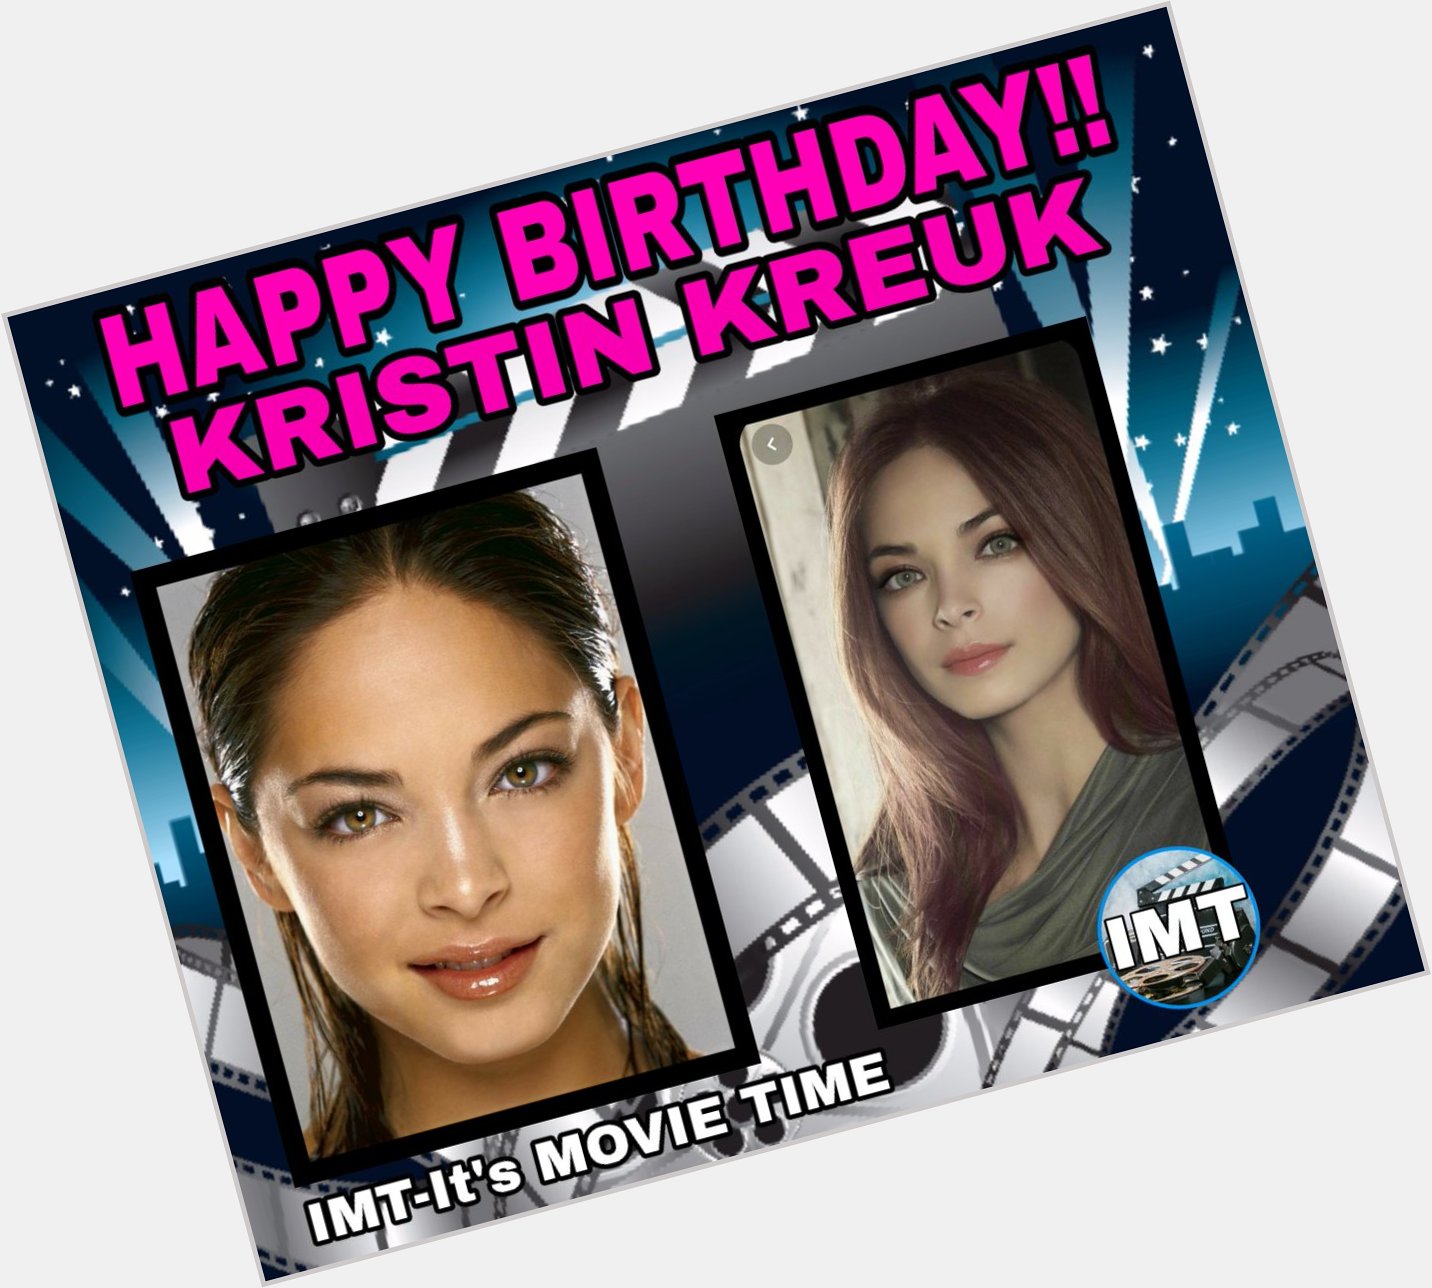 Happy Birthday to the Beautiful Kristin Kreuk! The actress is celebrating 37 years. 